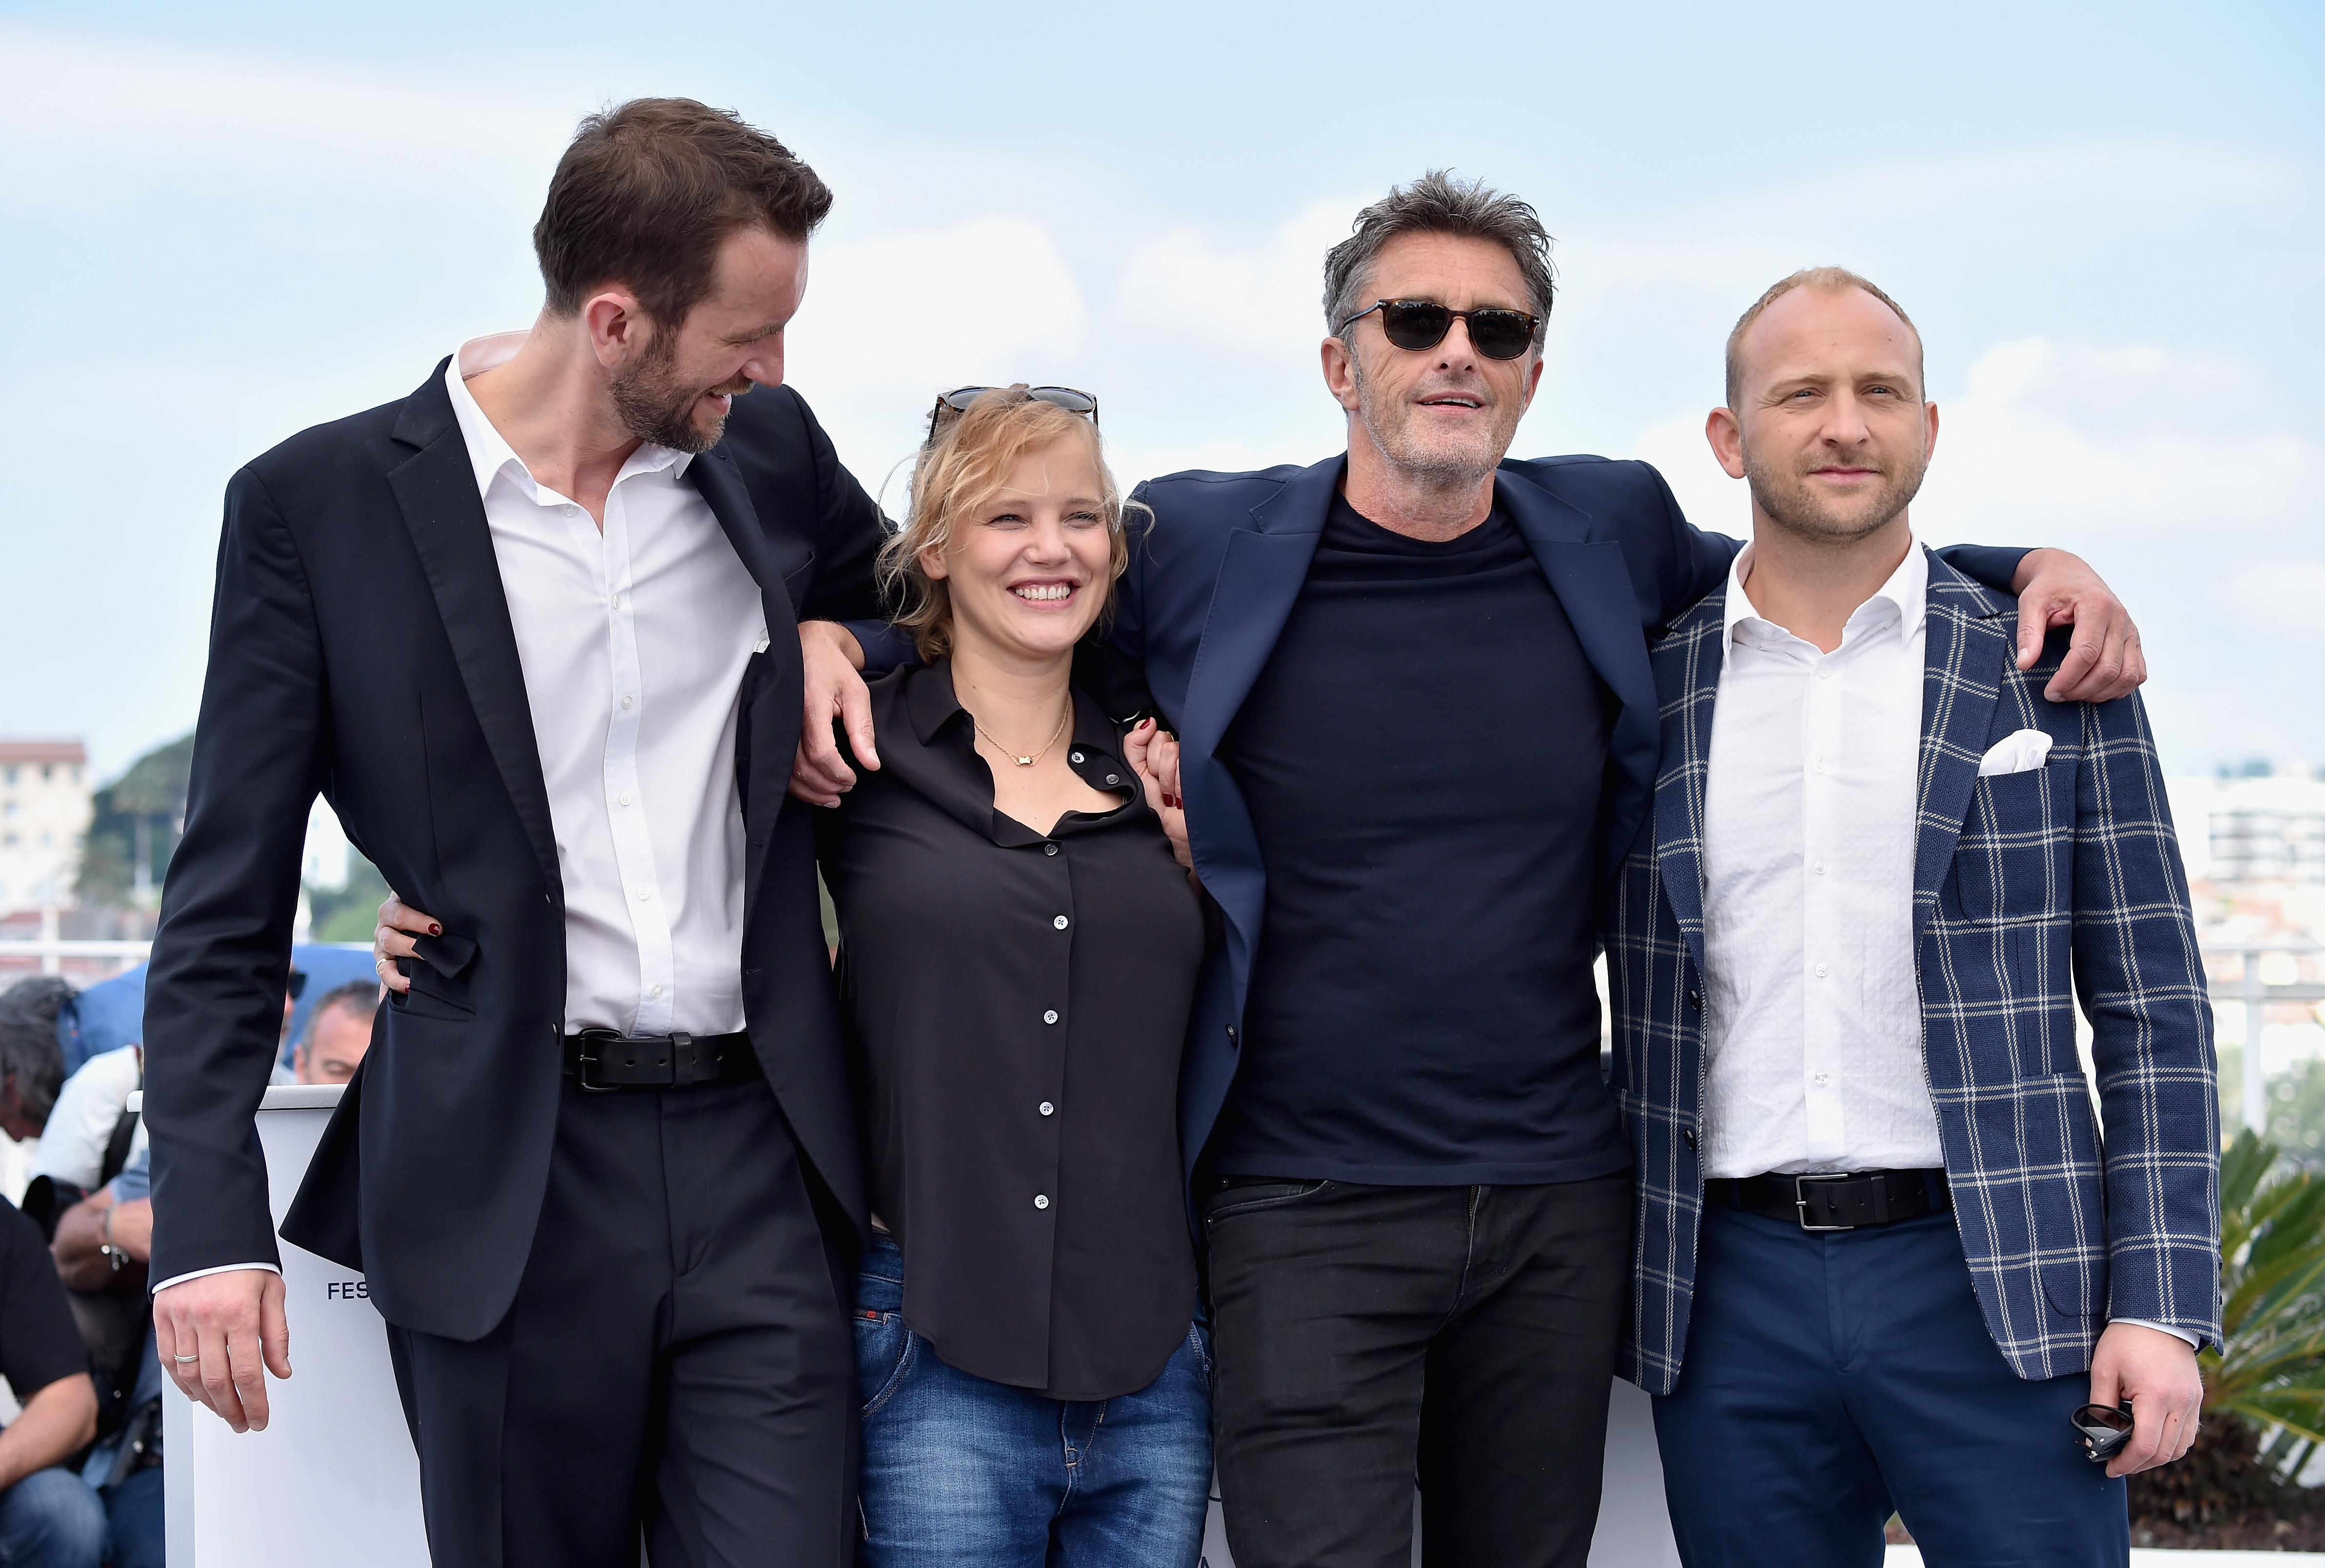 Actor Tomasz Kot, actress Joanna Kulig, director Pawel Pawlikowsk and actor Borys Szyc at the 71st annual Cannes Film Festival on May 11, 2018 in Cannes, France.